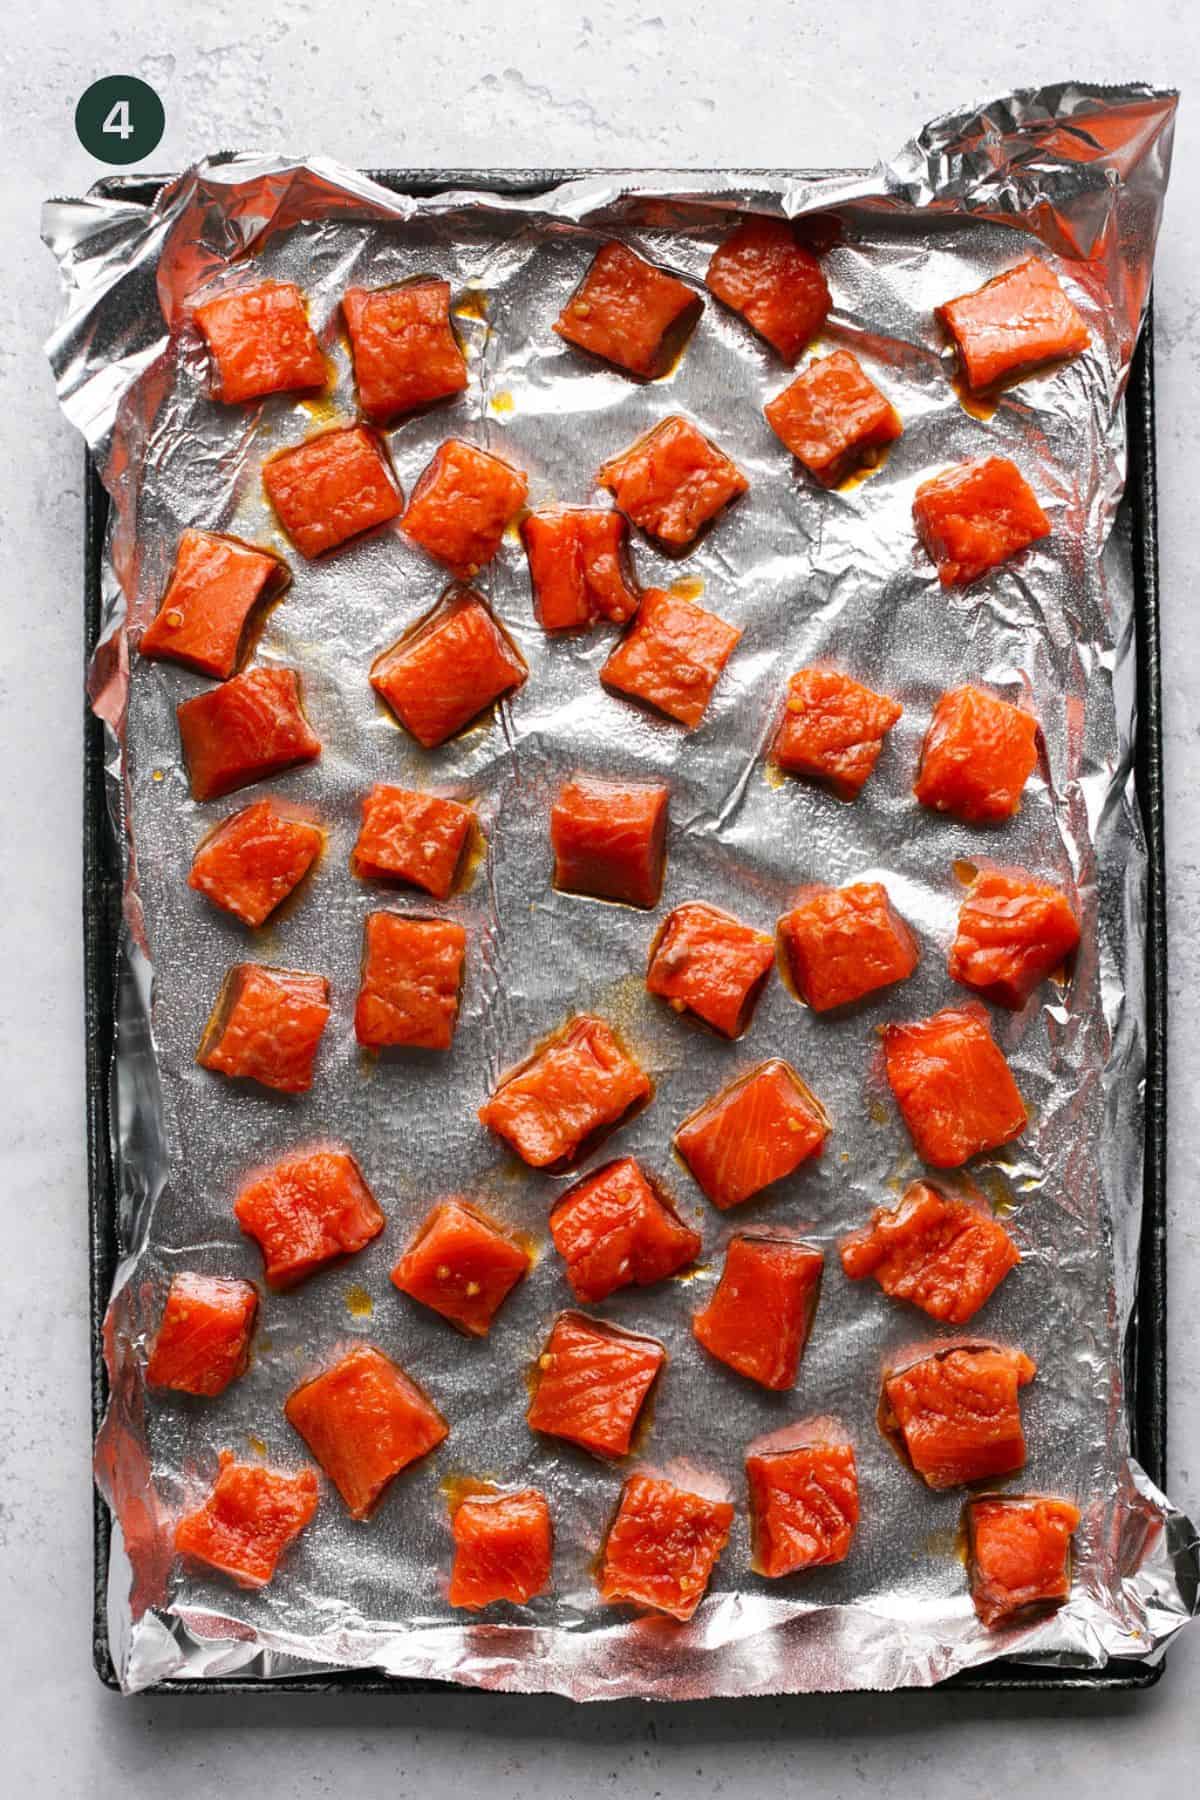 Cubed marinated raw salmon on foil lined baking sheet. 